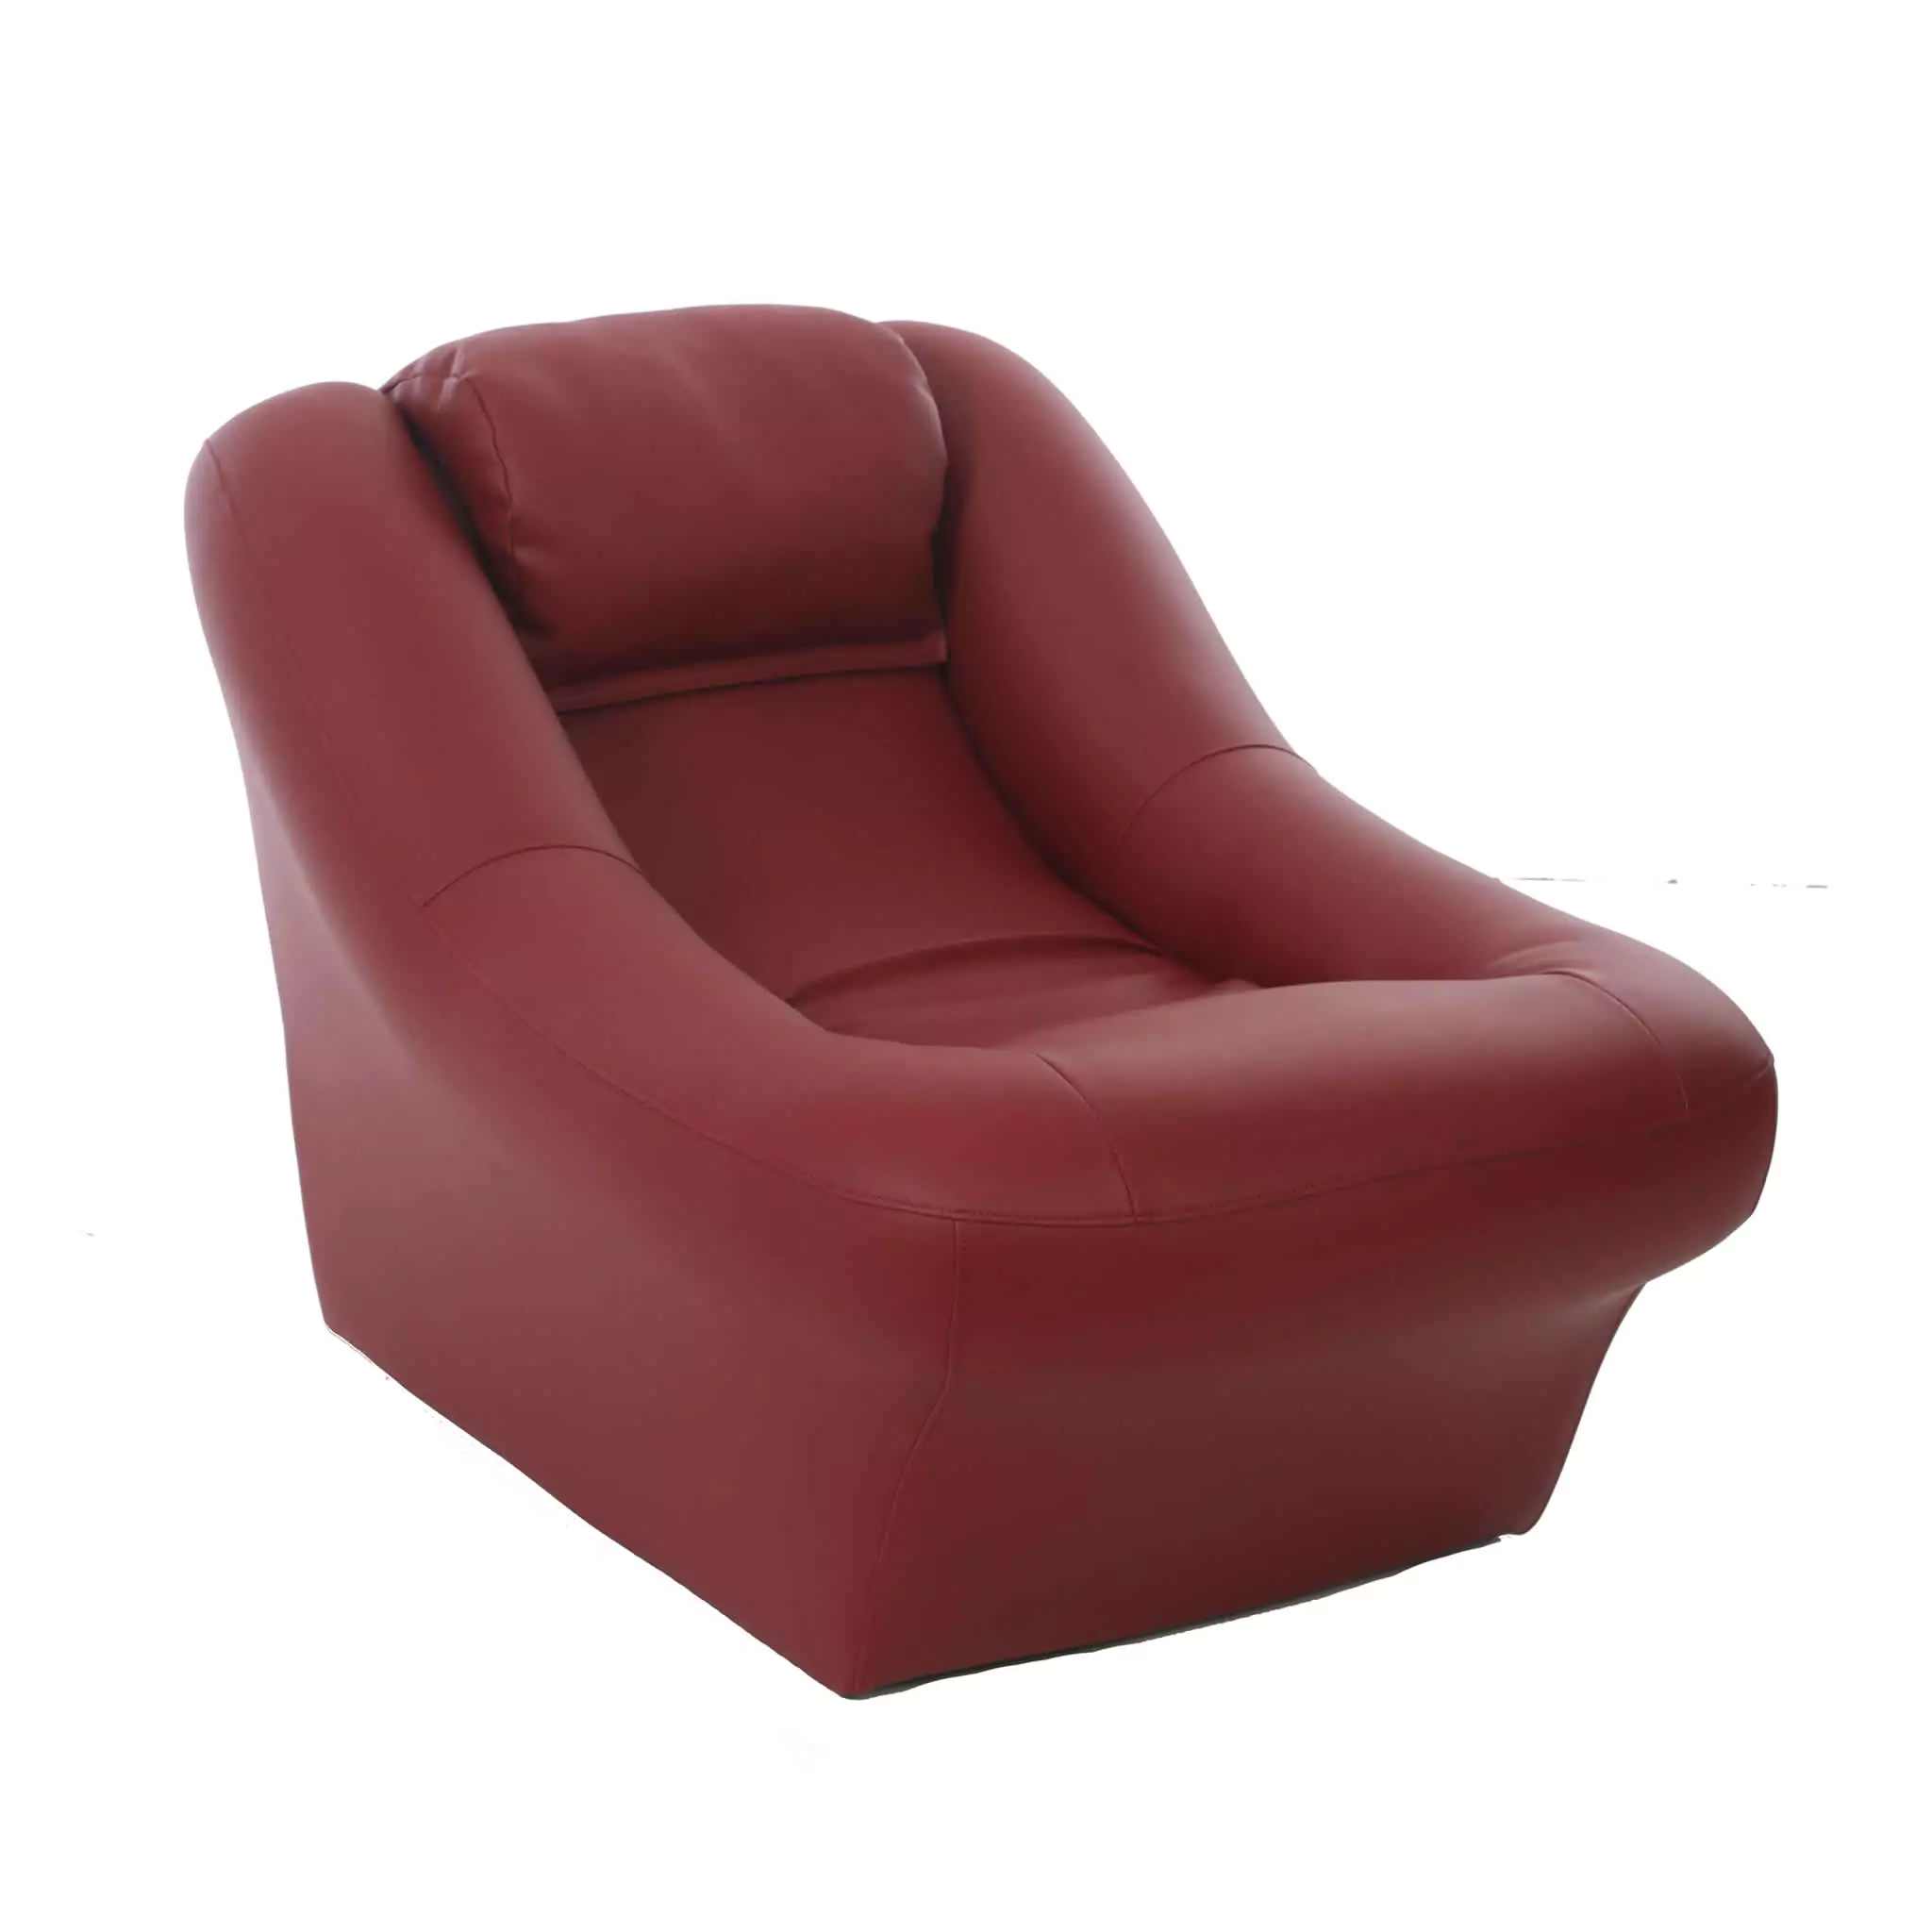 Simko Seating Products Foyer Seat Model 1